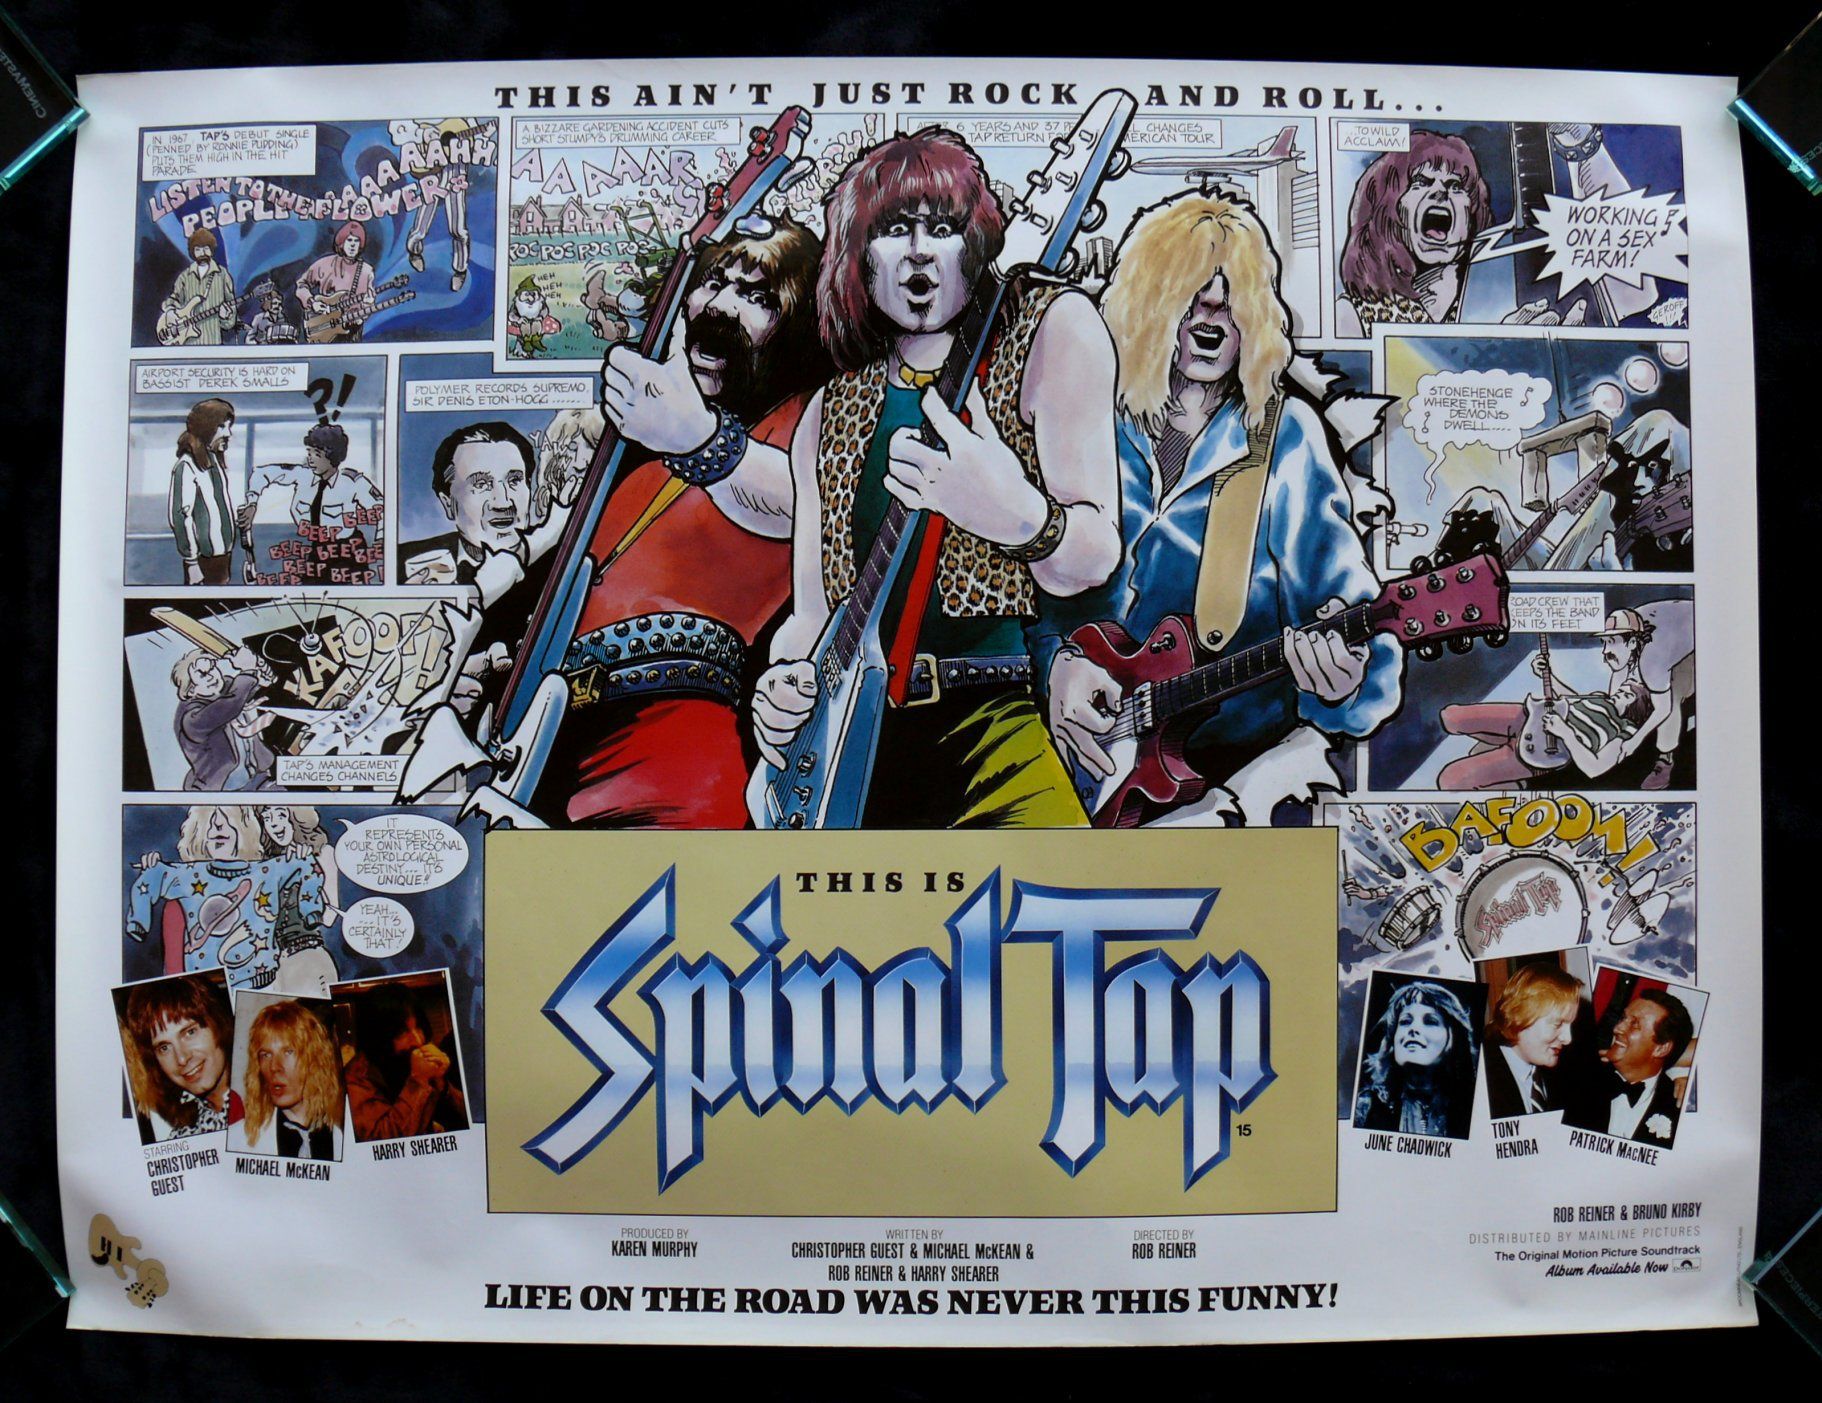 This-is-Spinal-Tap-cult-films-424720_1822_1403.jpg